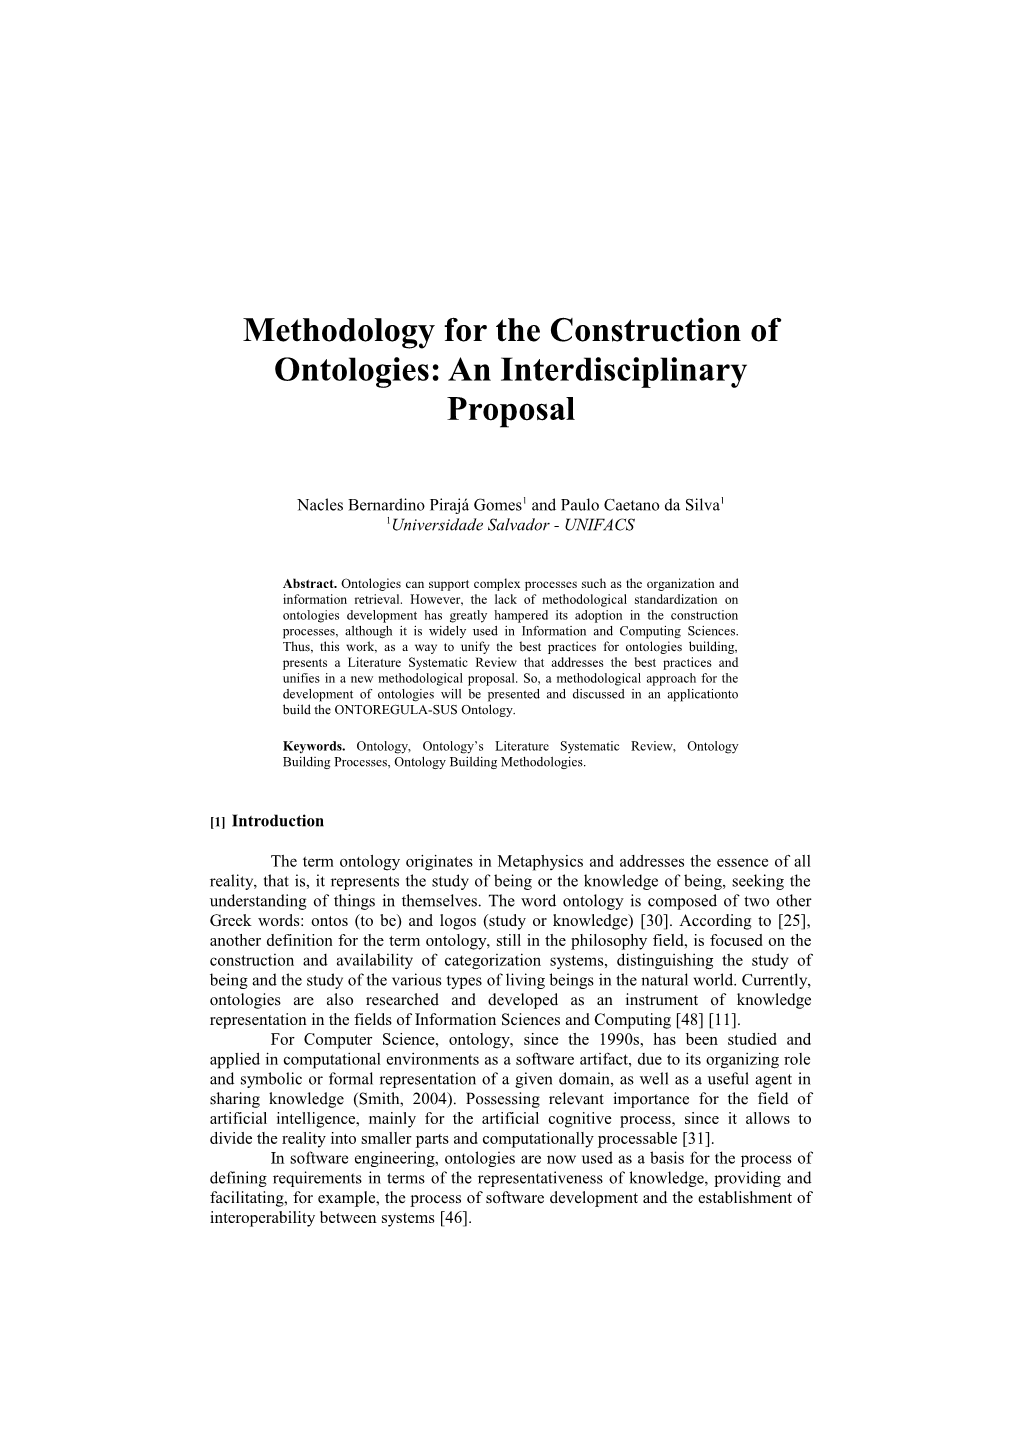 Methodology for the Construction of Ontologies: an Interdisciplinary Proposal